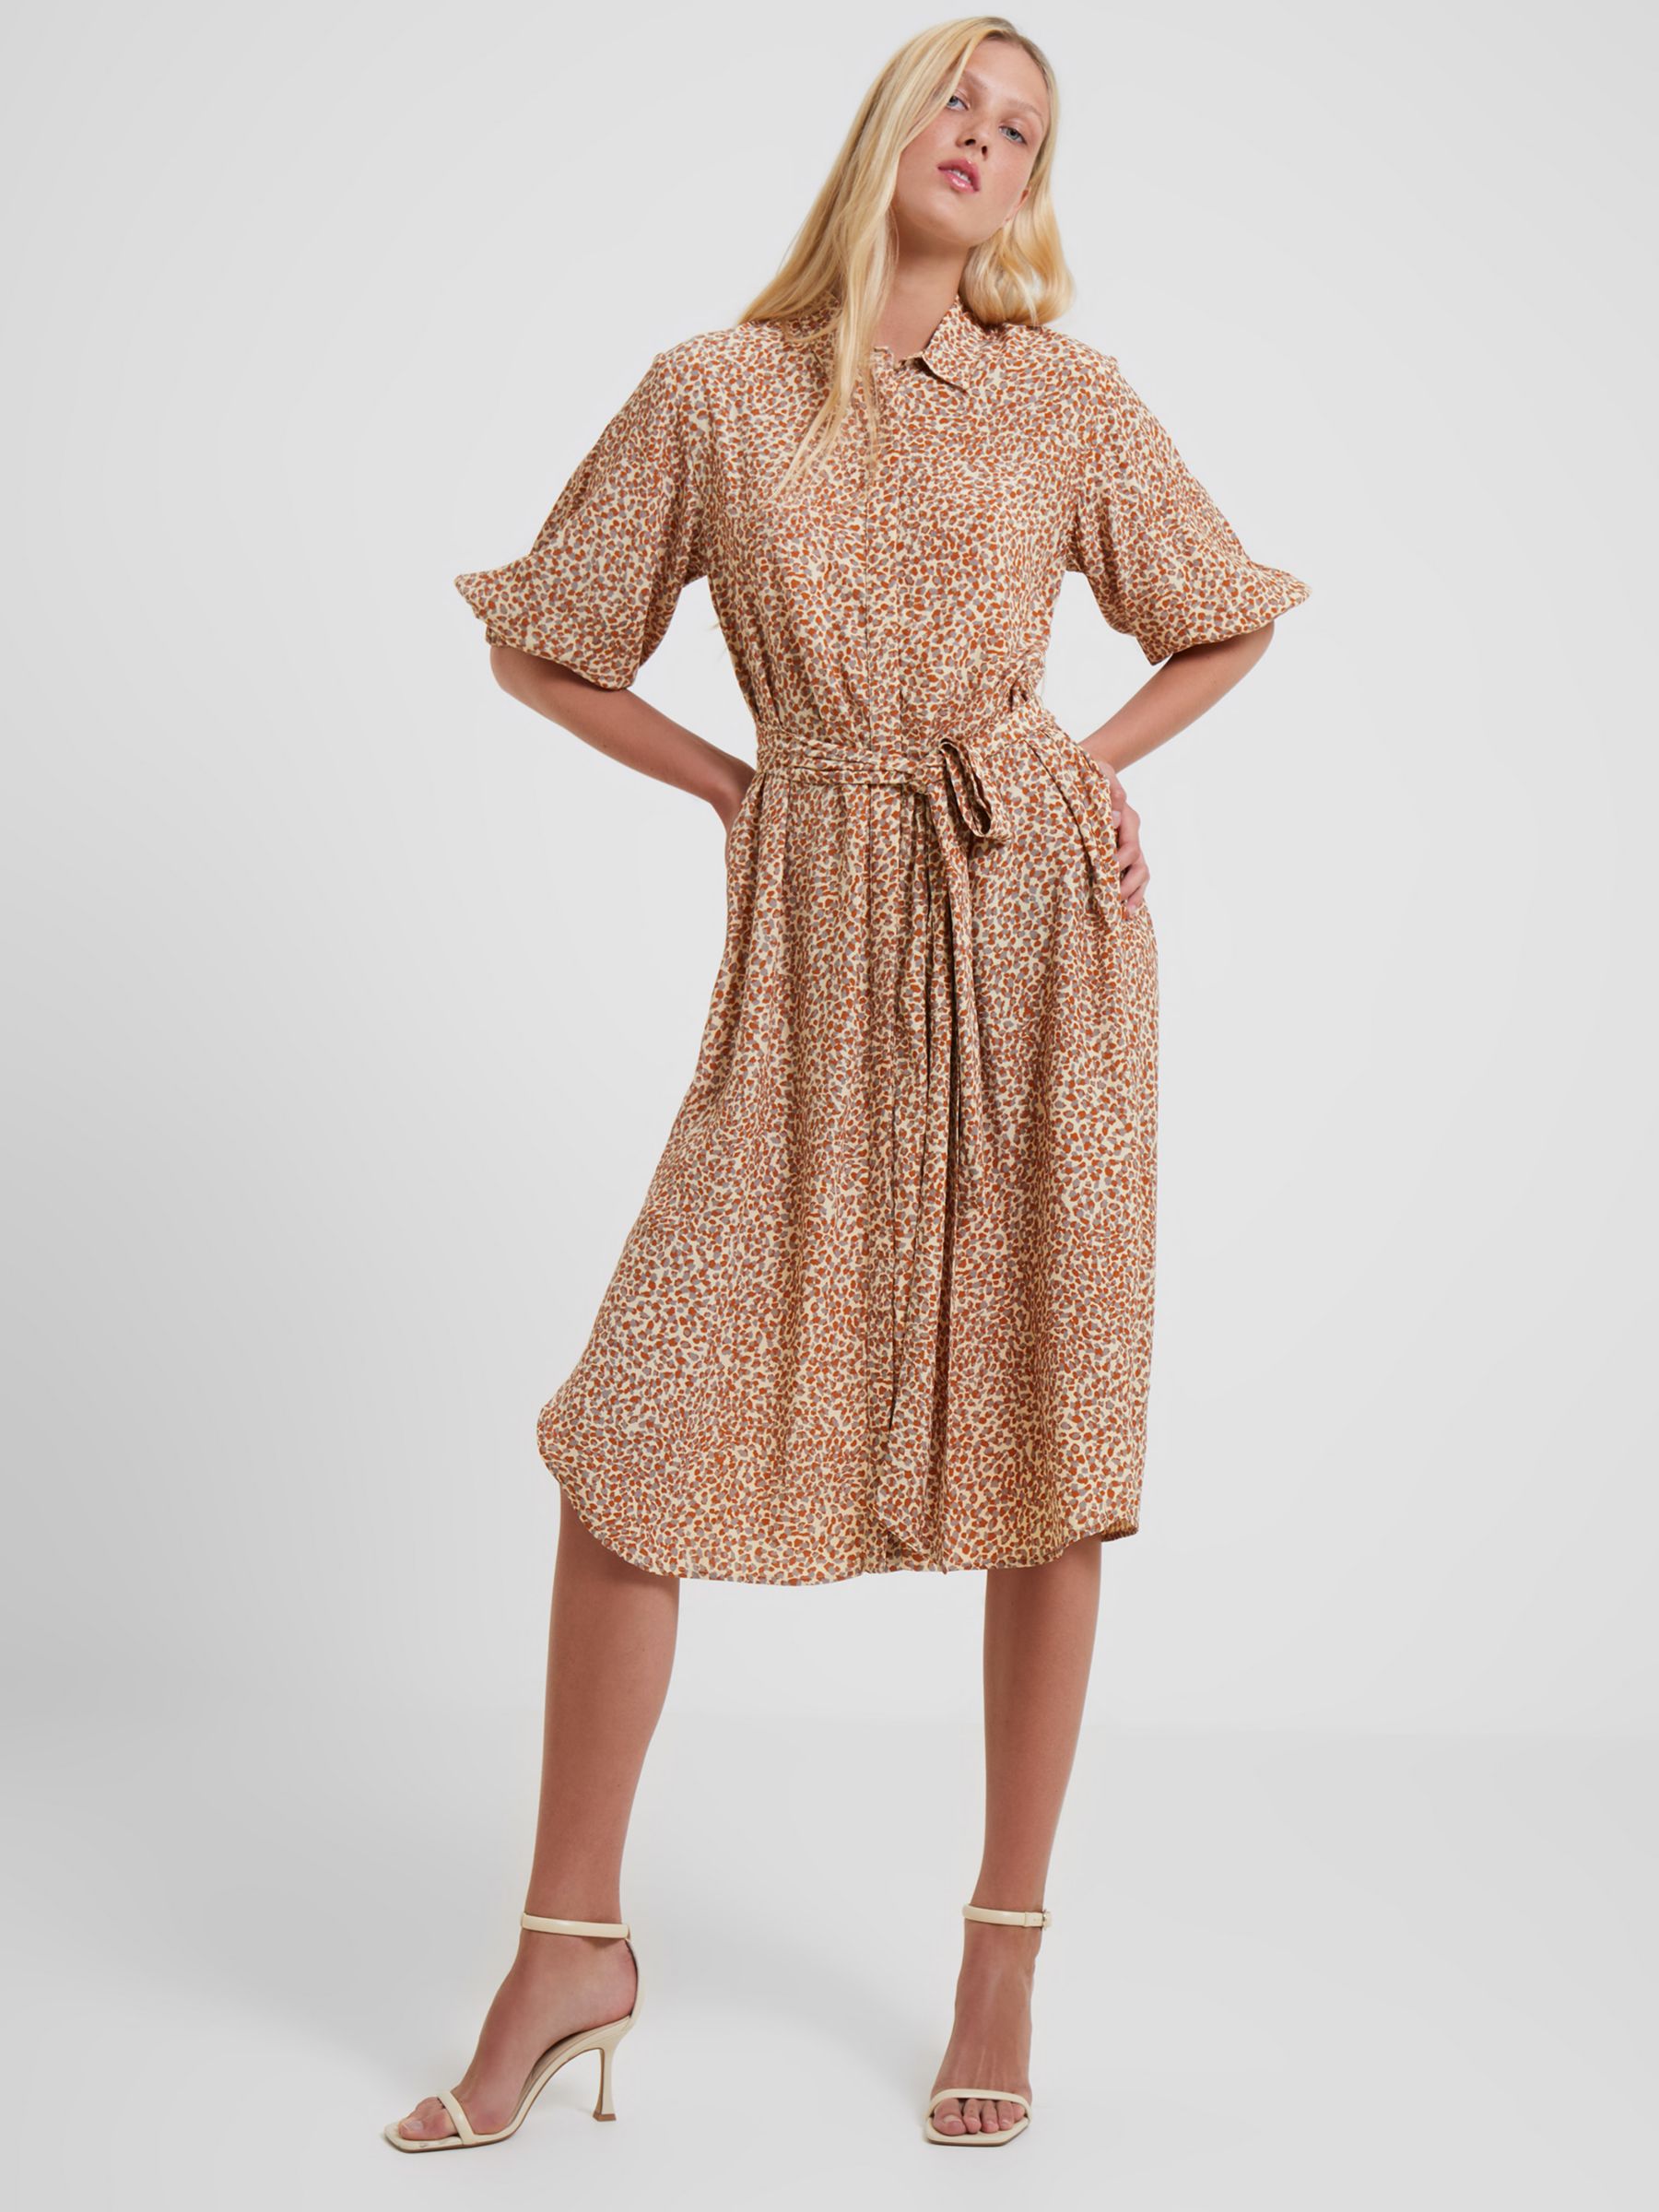 French Connection Cadie Delph Drape Shirt Dress, Shifting Sand, M